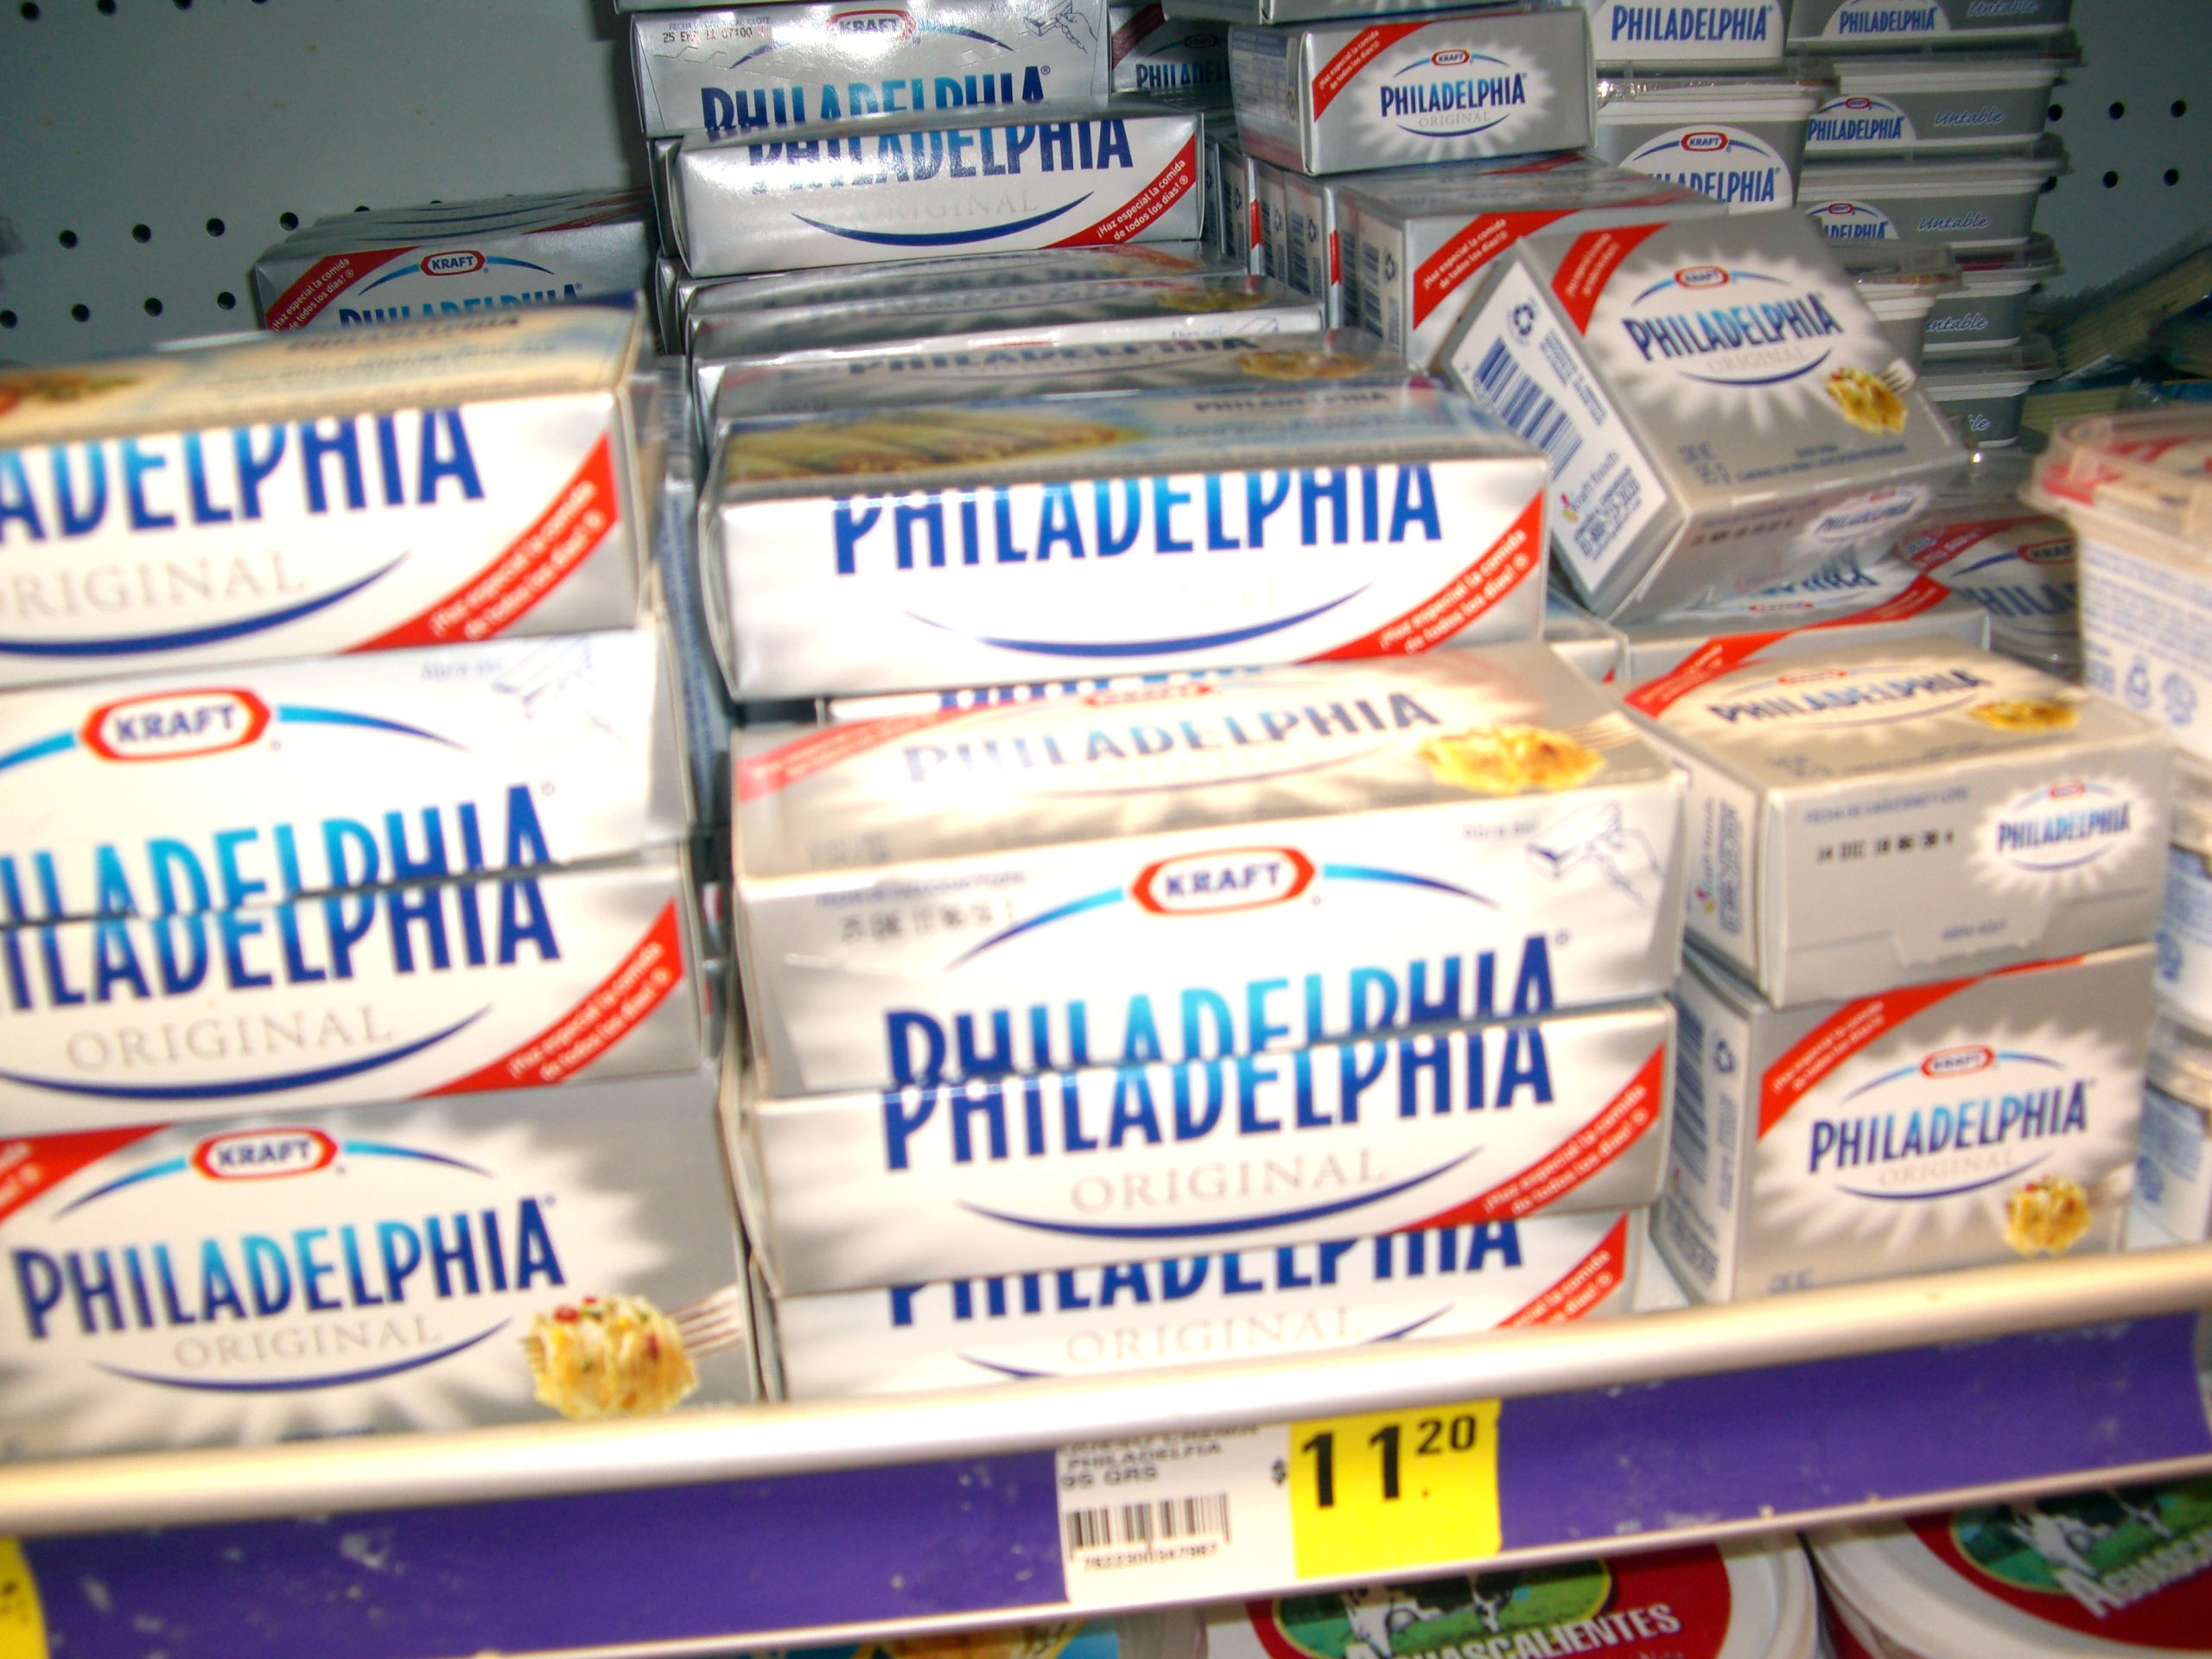 Packages of Philadelphia Cream Cheese